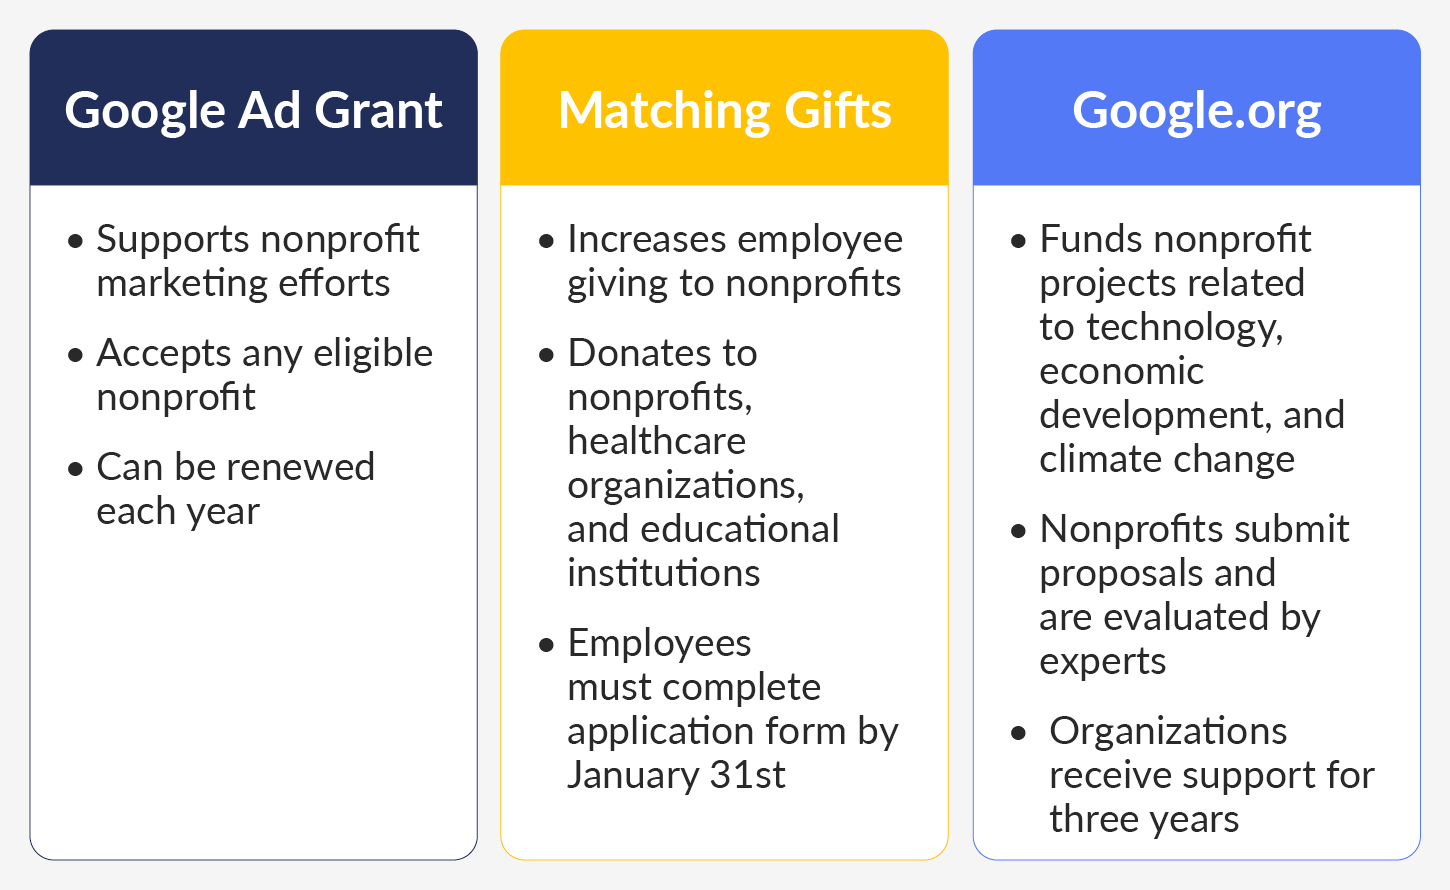 The graphic outlines the three types of corporate giving offered by Google, detailed below. 